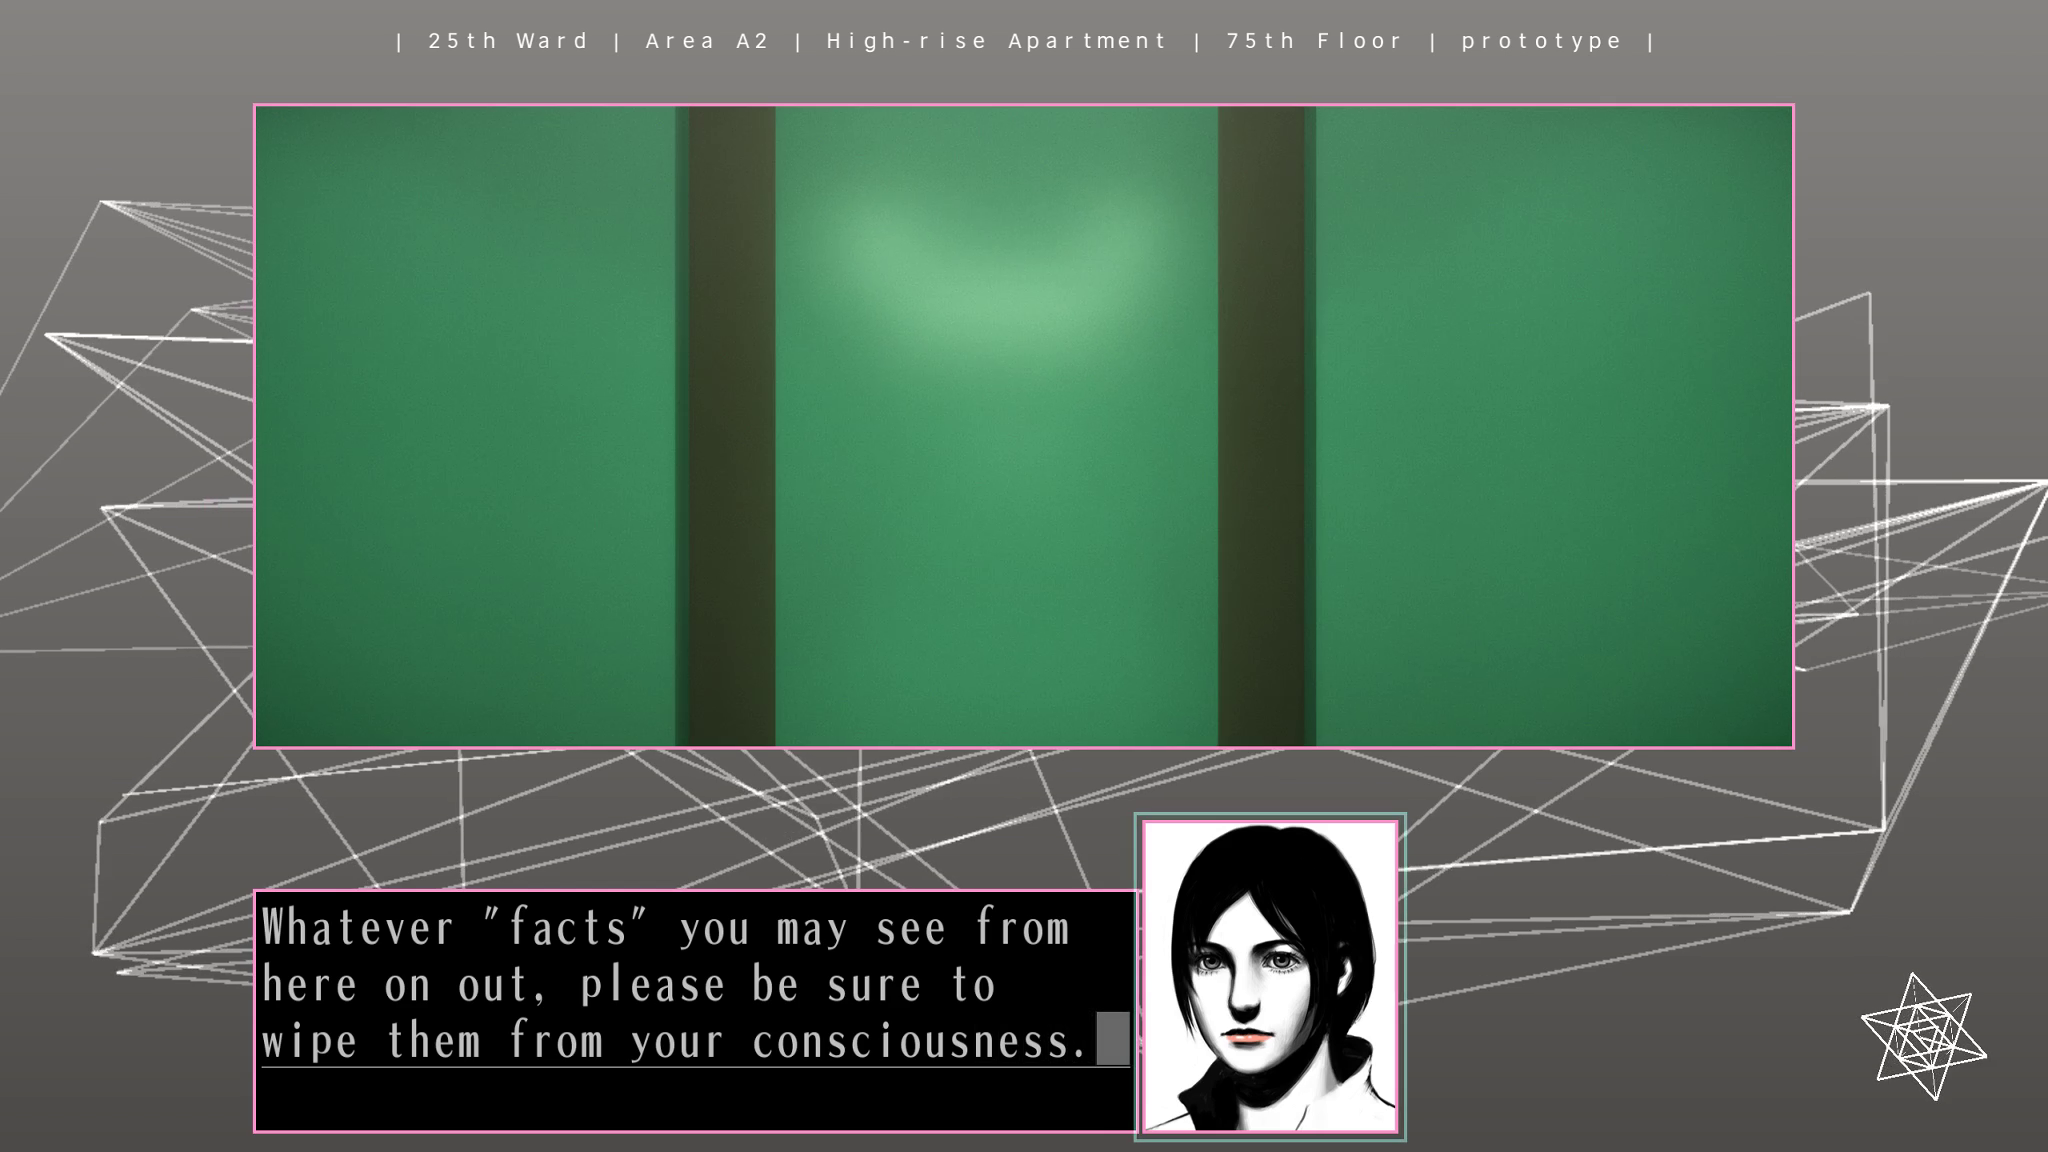 Screenshot from "prototype." Sakura says, "Whatever 'facts' you may see from here on out, please be sure to wipe them from your consciousness."